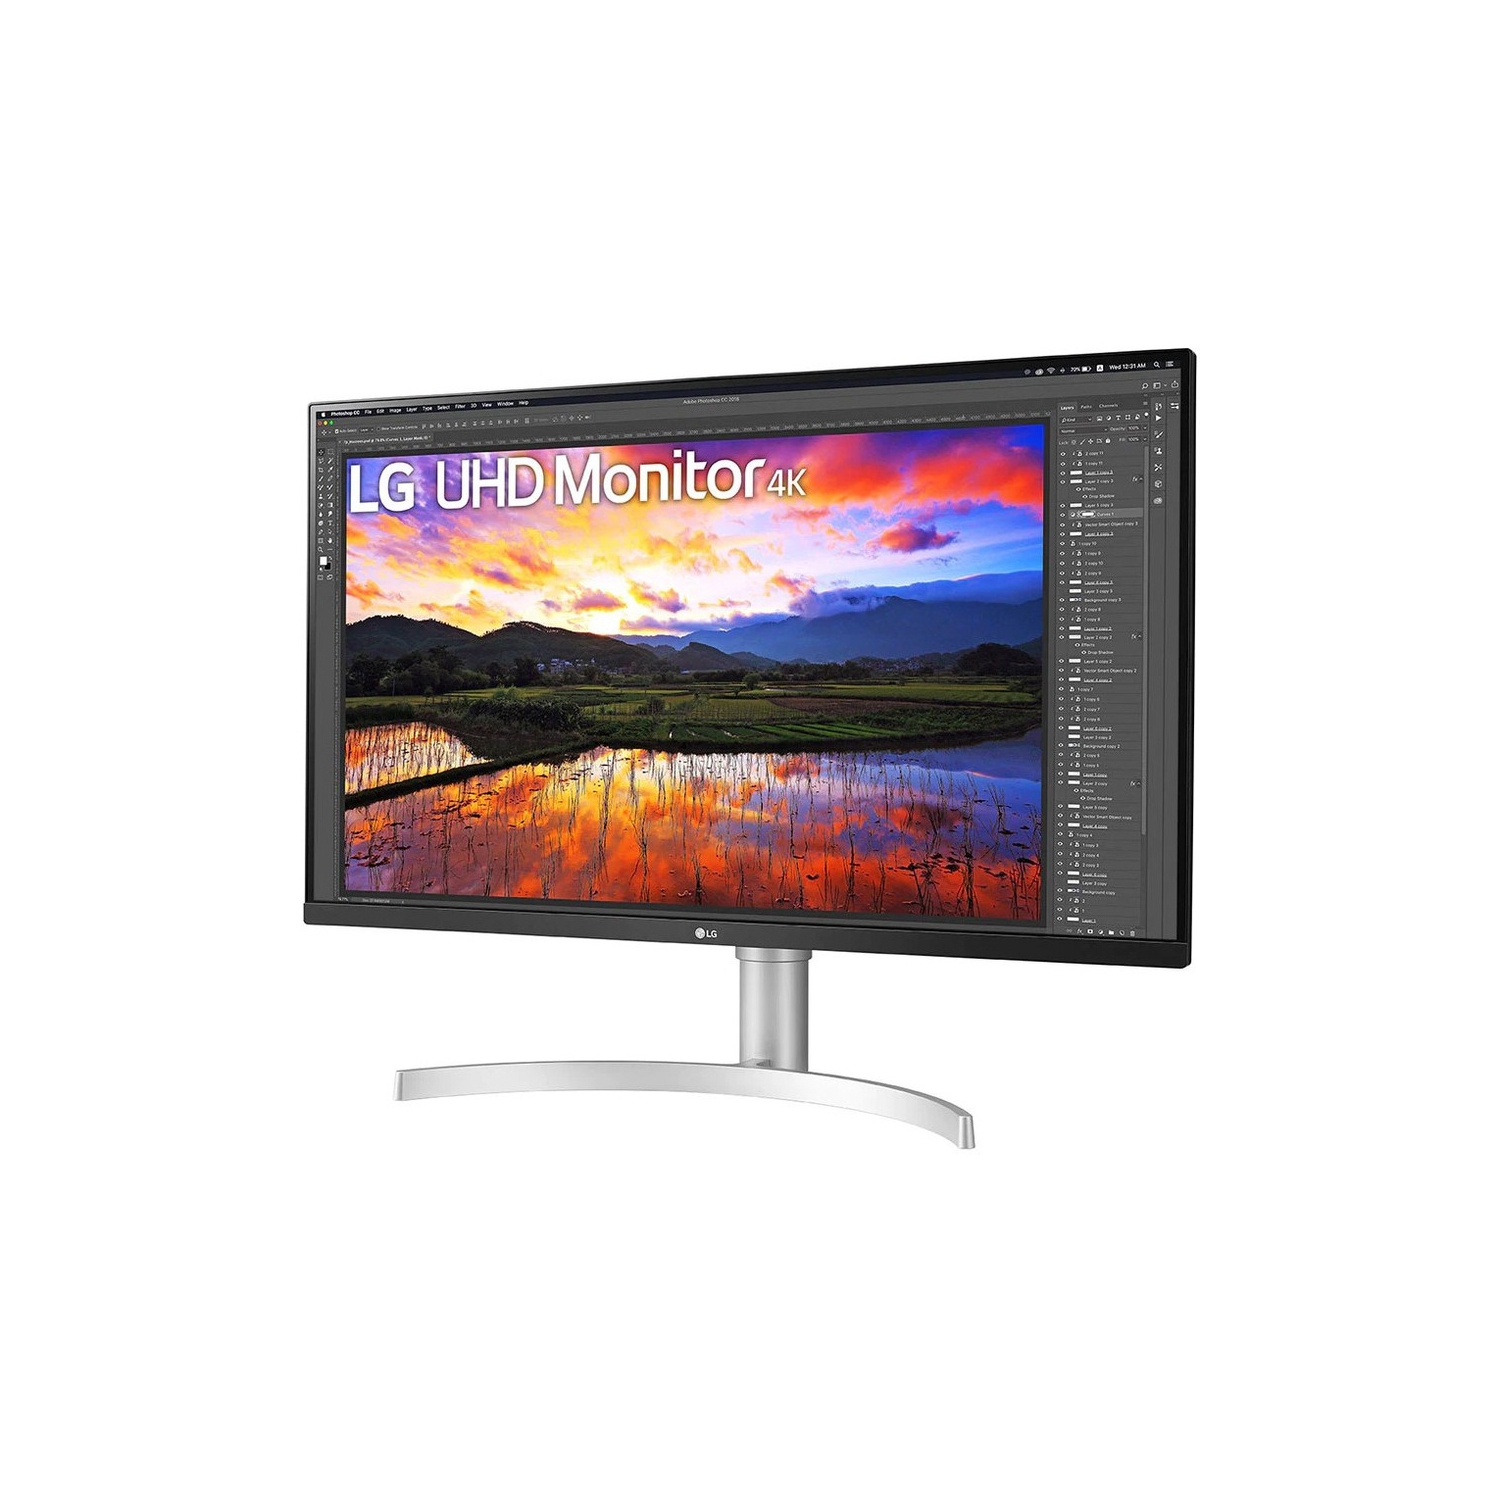 LG 32UN650-W 32 Inch UHD (3840 x 2160) IPS Ultrafine Display with HDR10 Compatibility, DCI-P3 95% Color Gamut, AMD FreeSync, and 3-Side Virtually Borderless Height Adjustable Stand